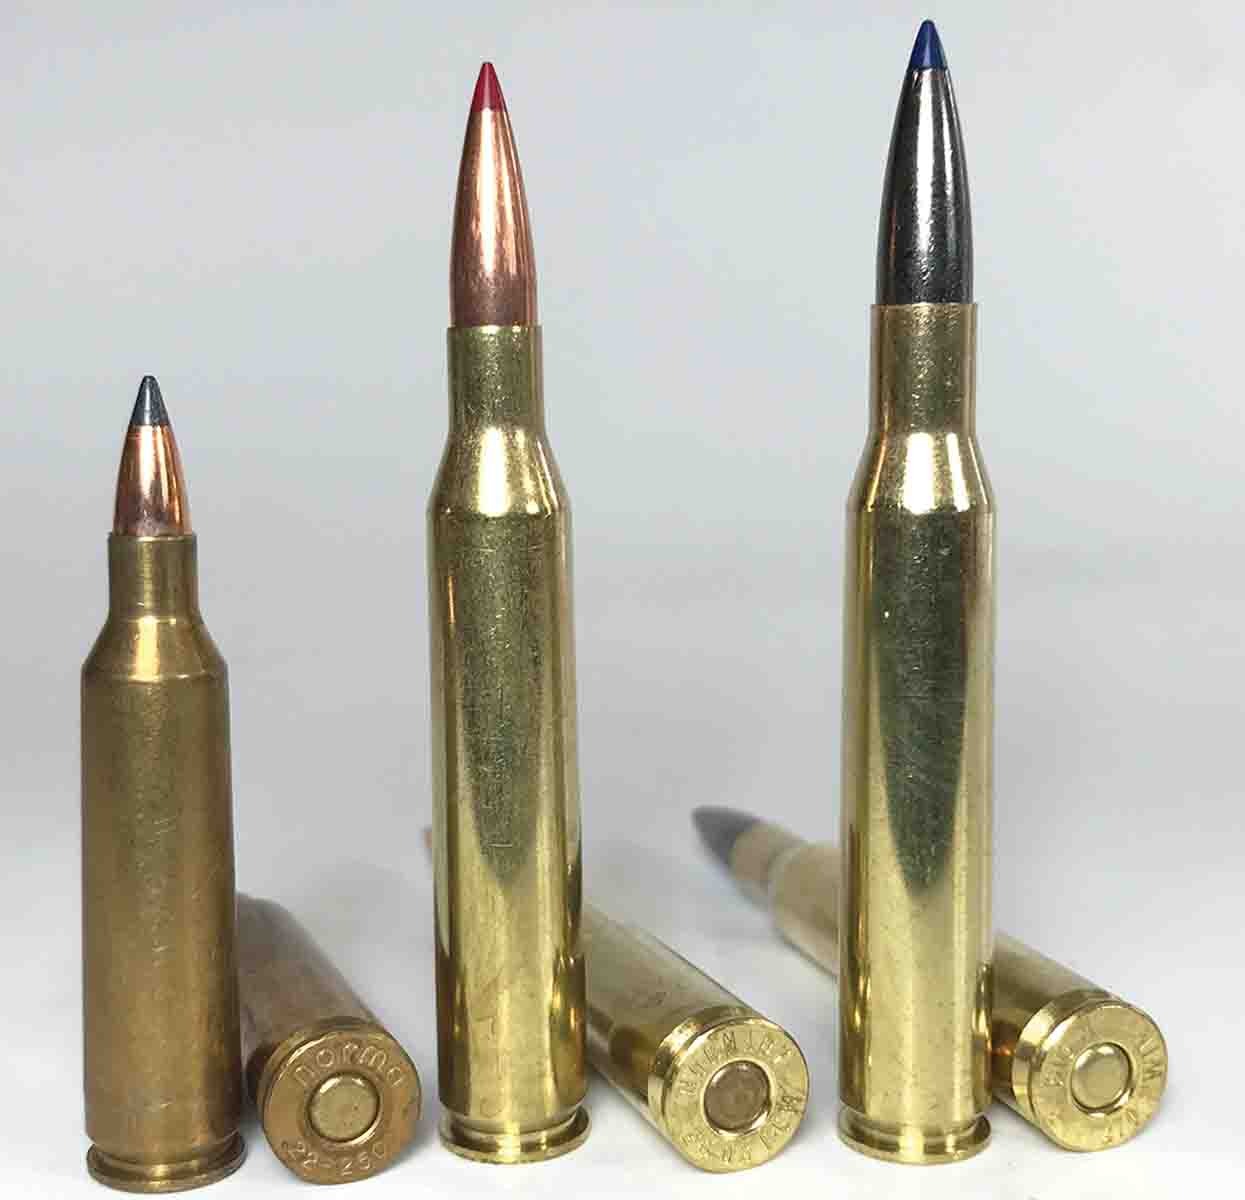 The .25-06 Remington (center) is sort of a cross between the .22-250 Remington (left) and the .270 Winchester (right).